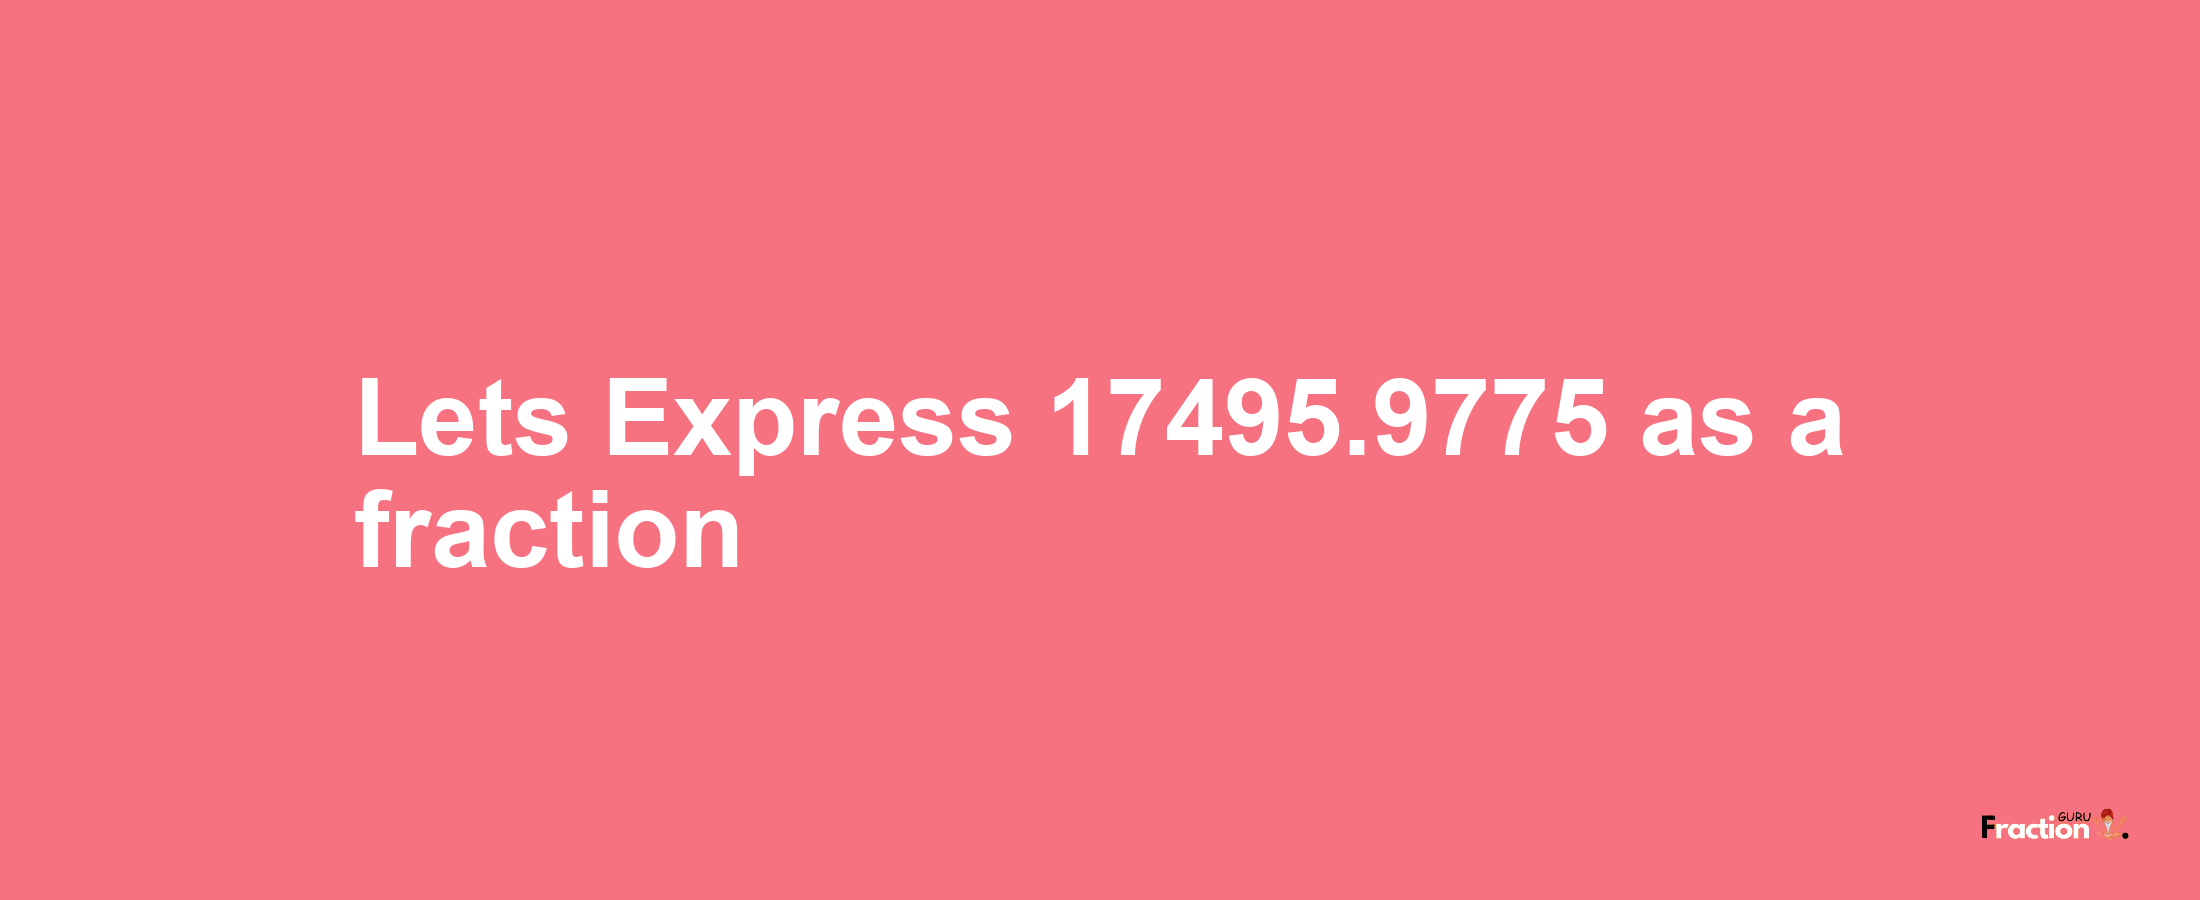 Lets Express 17495.9775 as afraction